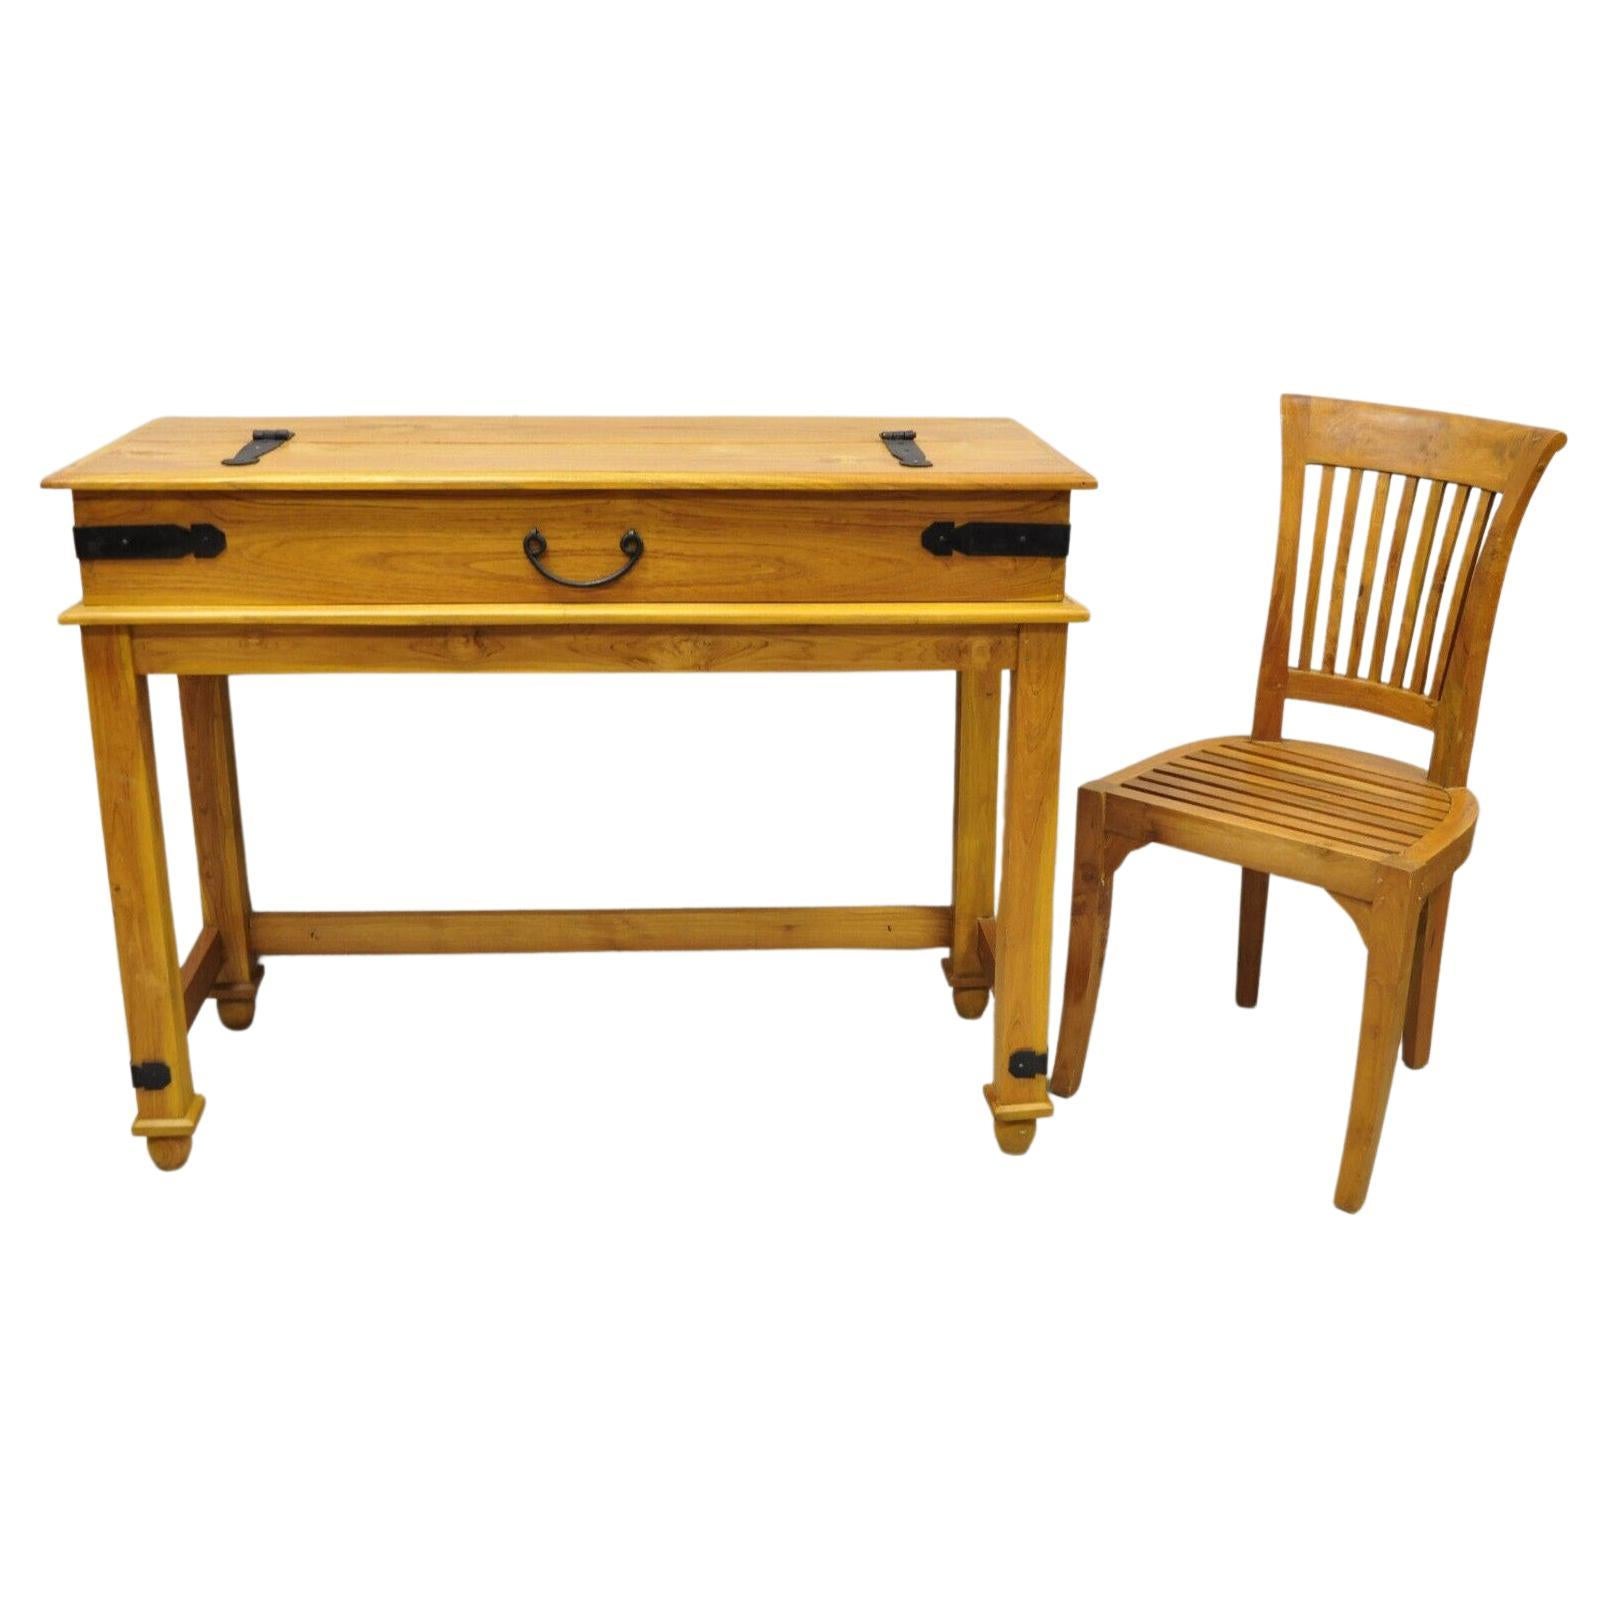 Campaign Style Teak Wood Fliptop Writing Desk with Side Chair, 2pc Set